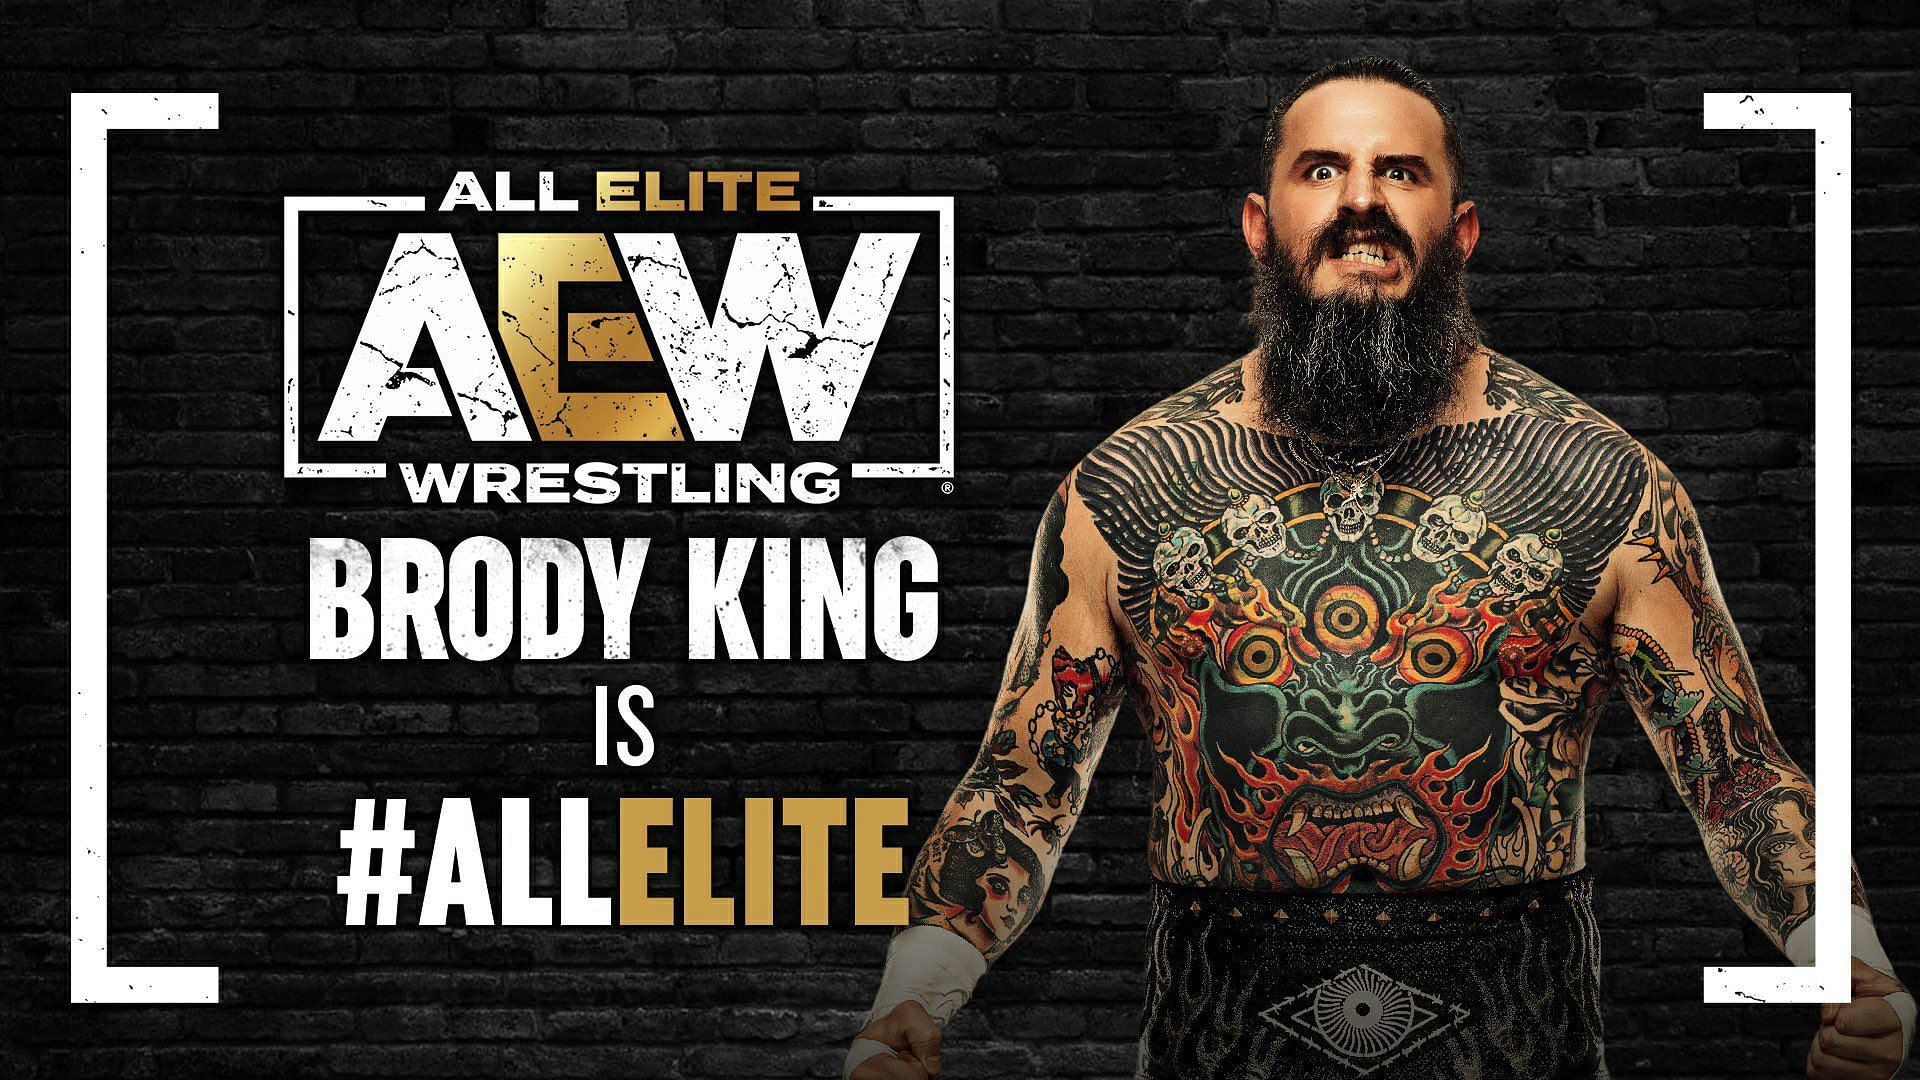 Brody King is now a part of All Elite Wrestling